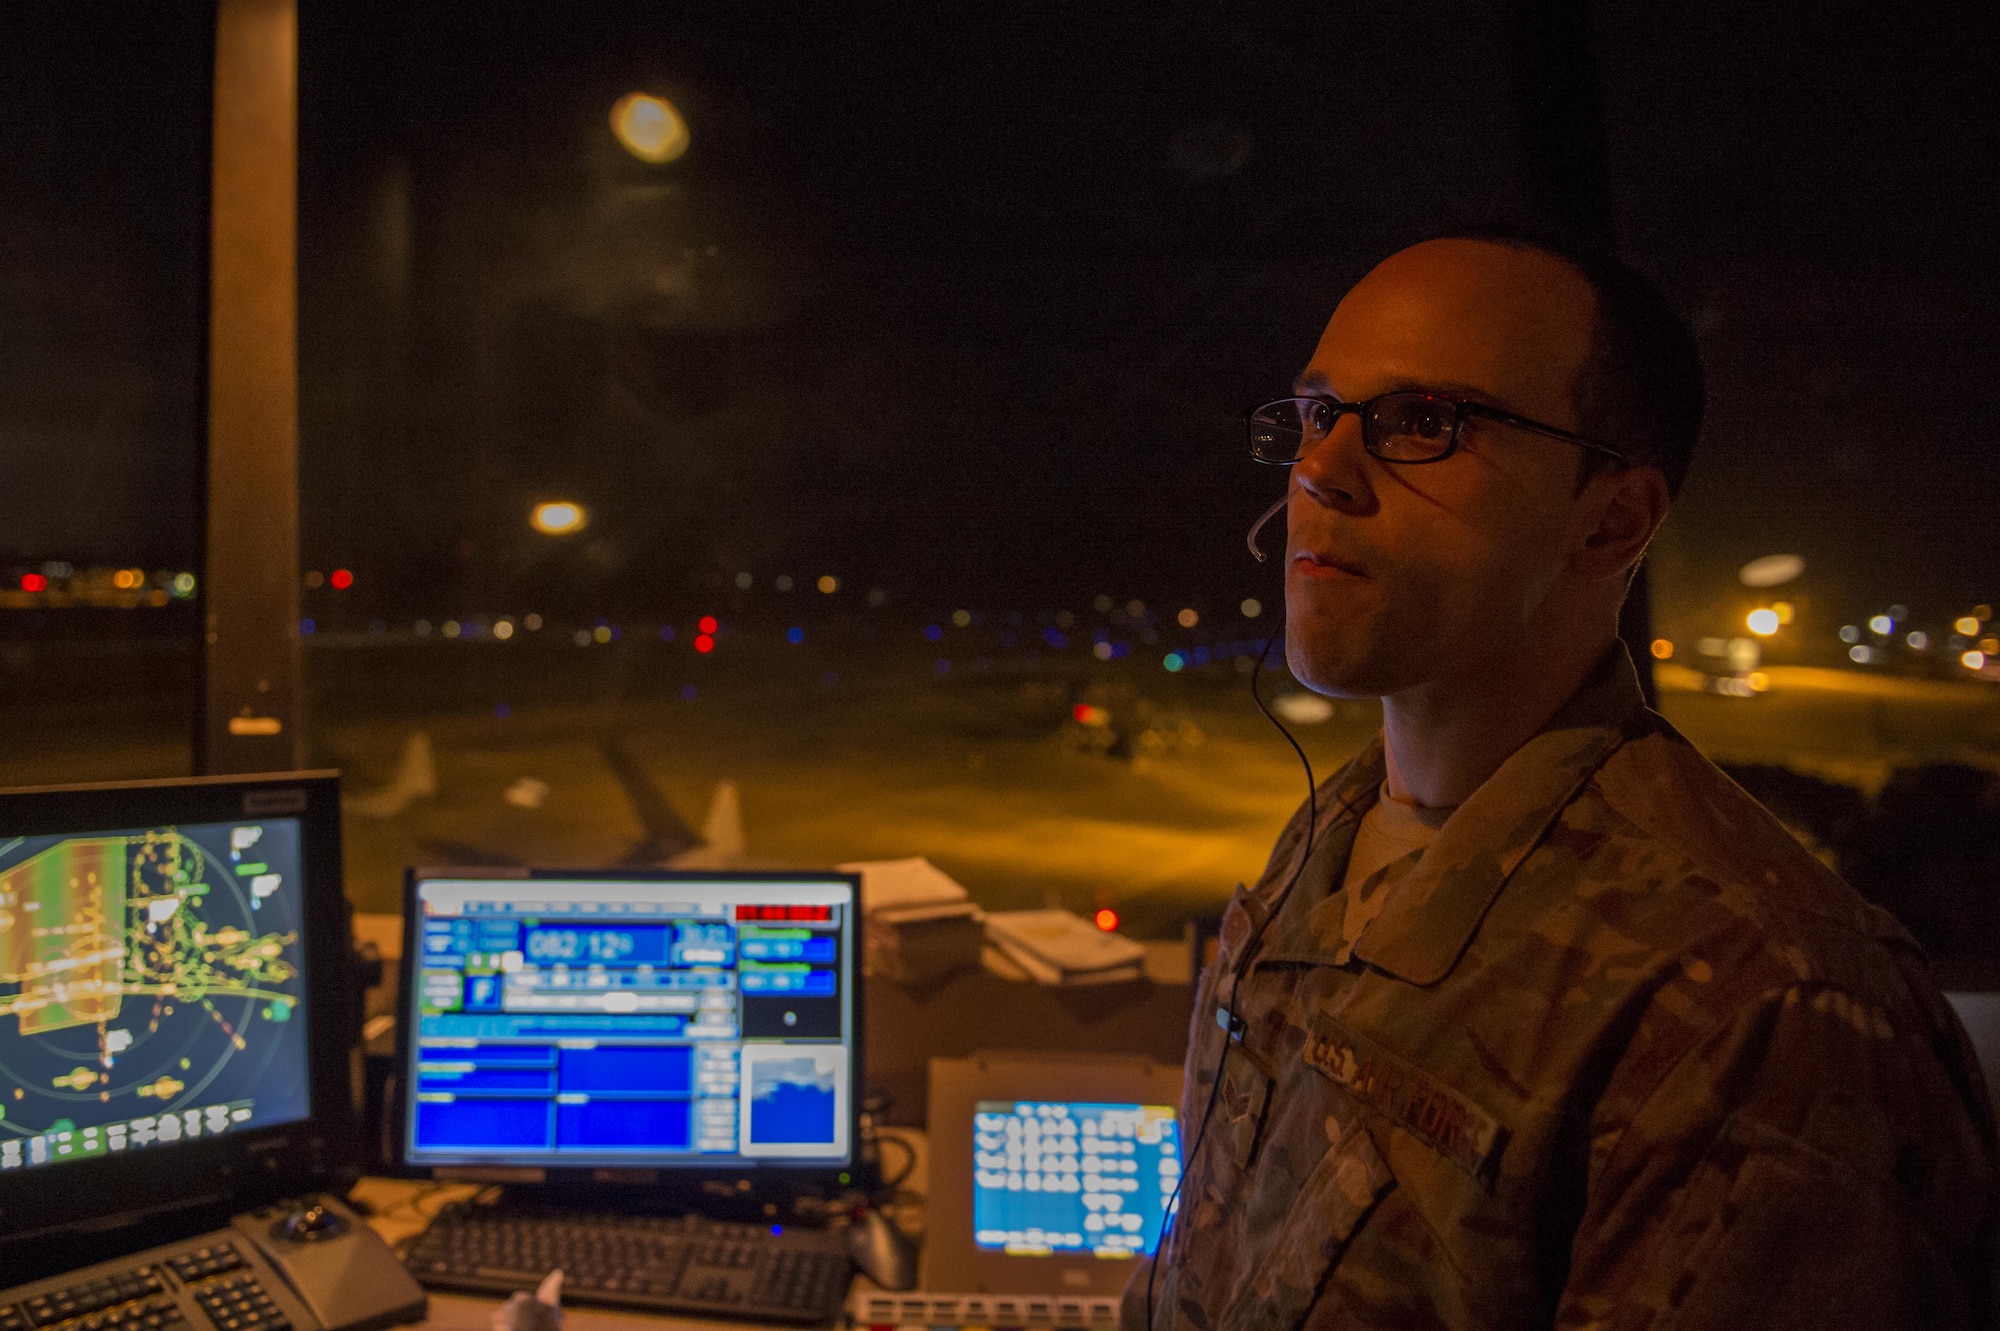 Senior Airman Xavier Rodriguez, an air traffic controller with the 1st Special Operations Support Squadron, watches as aircraft land during Emerald Warrior on Hulburt Field, Fla. Feb, 28, 2017. Emerald Warrior is a U.S. Special Operations Command exercise during which joint special operations forces train to respond to various threats across the spectrum of conflict. (U.S. Air Force photo by Airman 1st Class Sean Carnes)